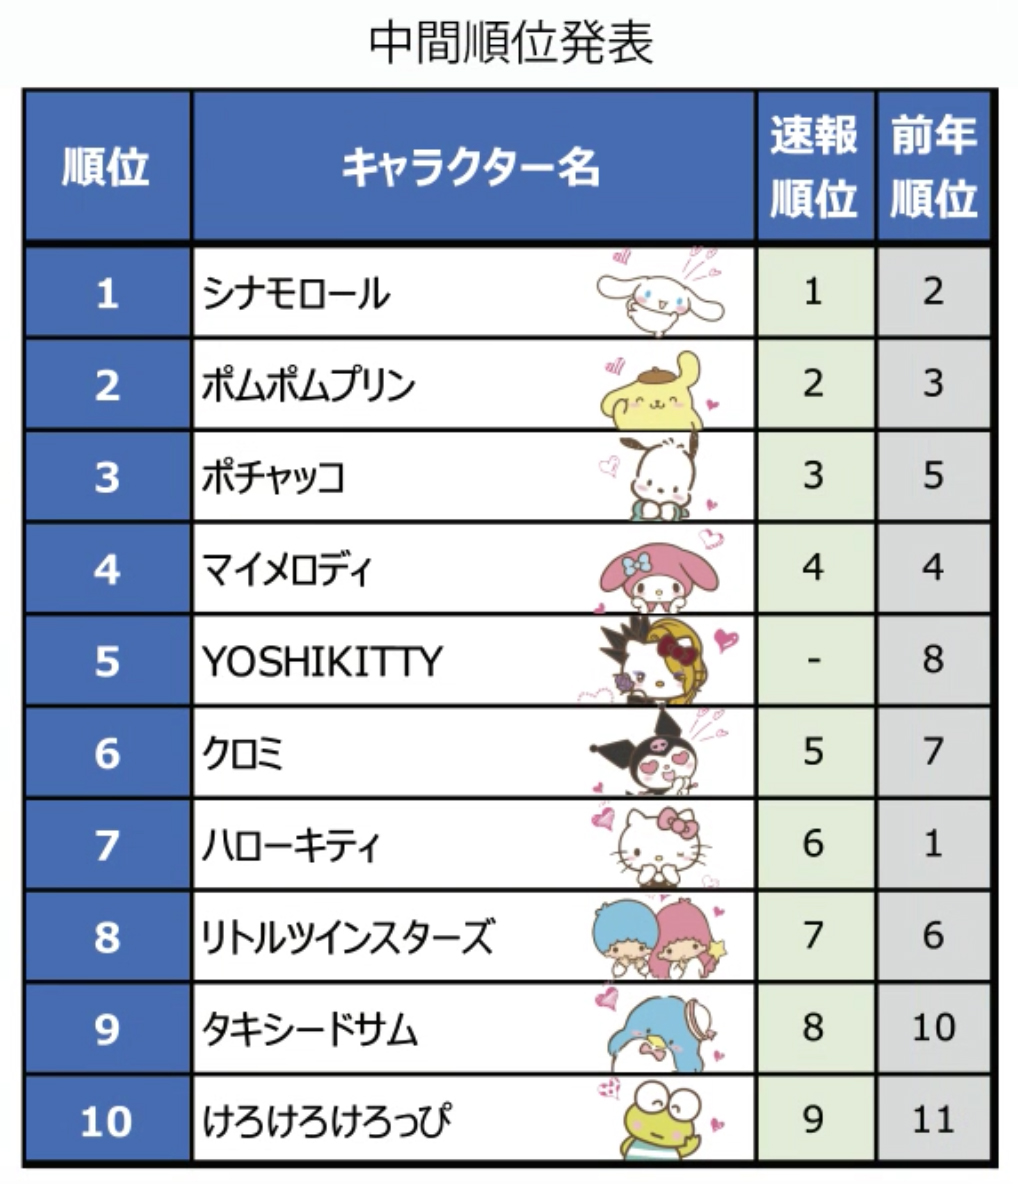 2020 Sanrio Character Ranking Top 10 Characters Of Second RoundUp